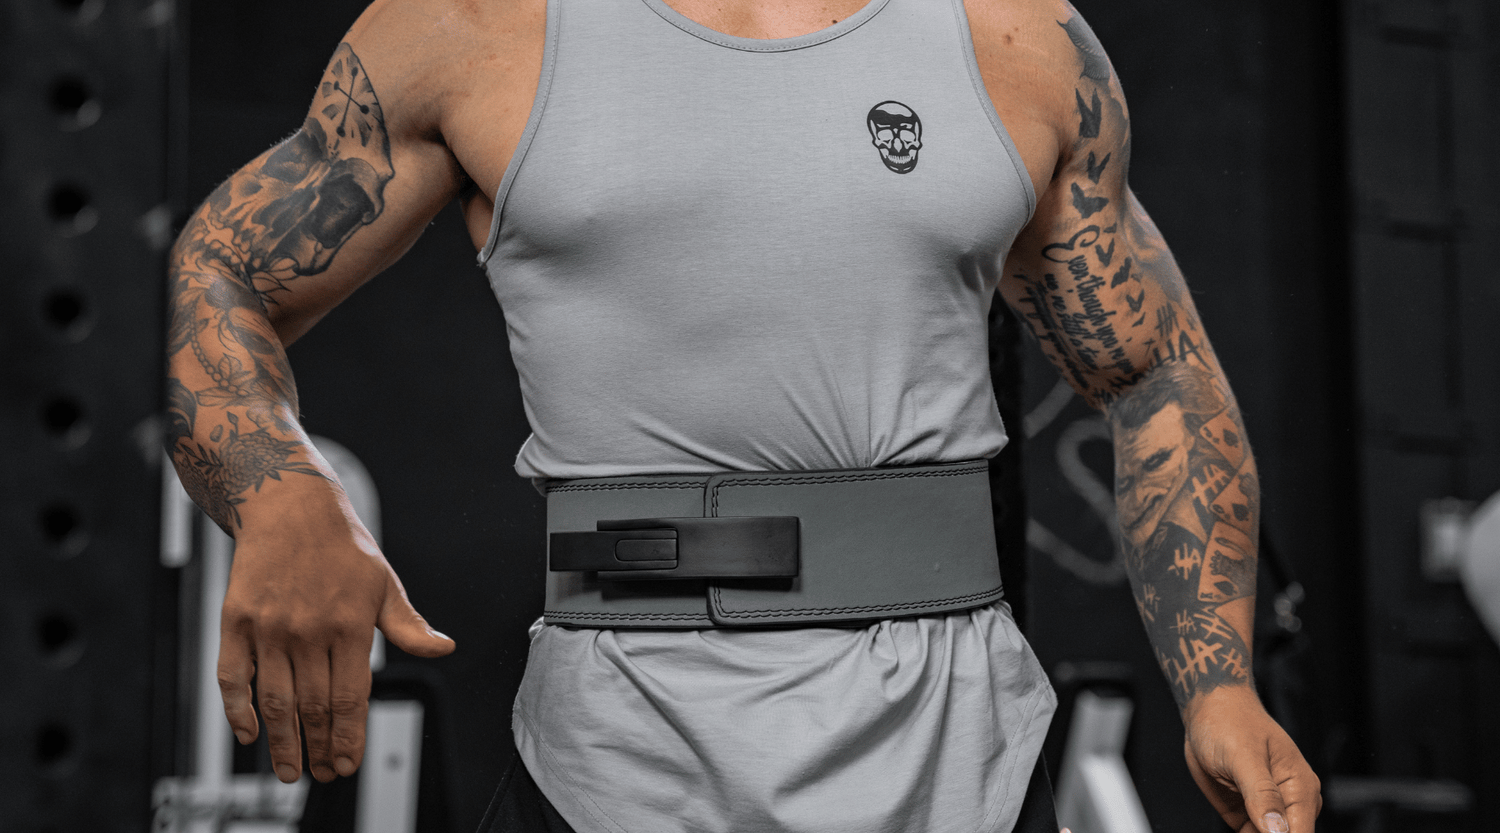 Exercises You Should (& Shouldn't) Use A Weightlifting Belt